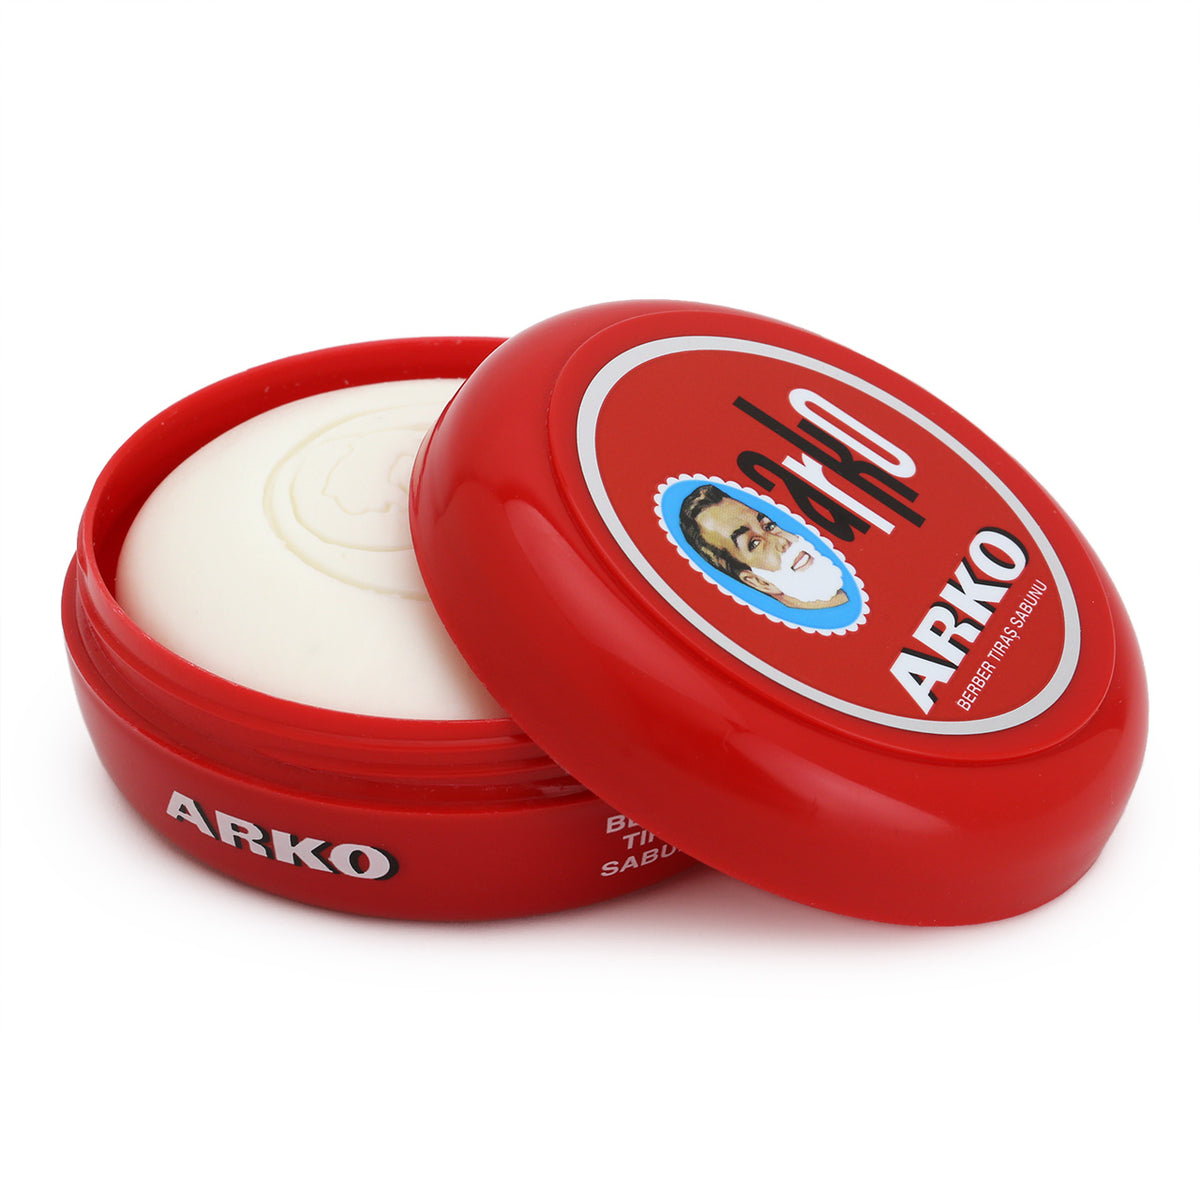 Arko Shaving Soap is a haard soap in a lidded container